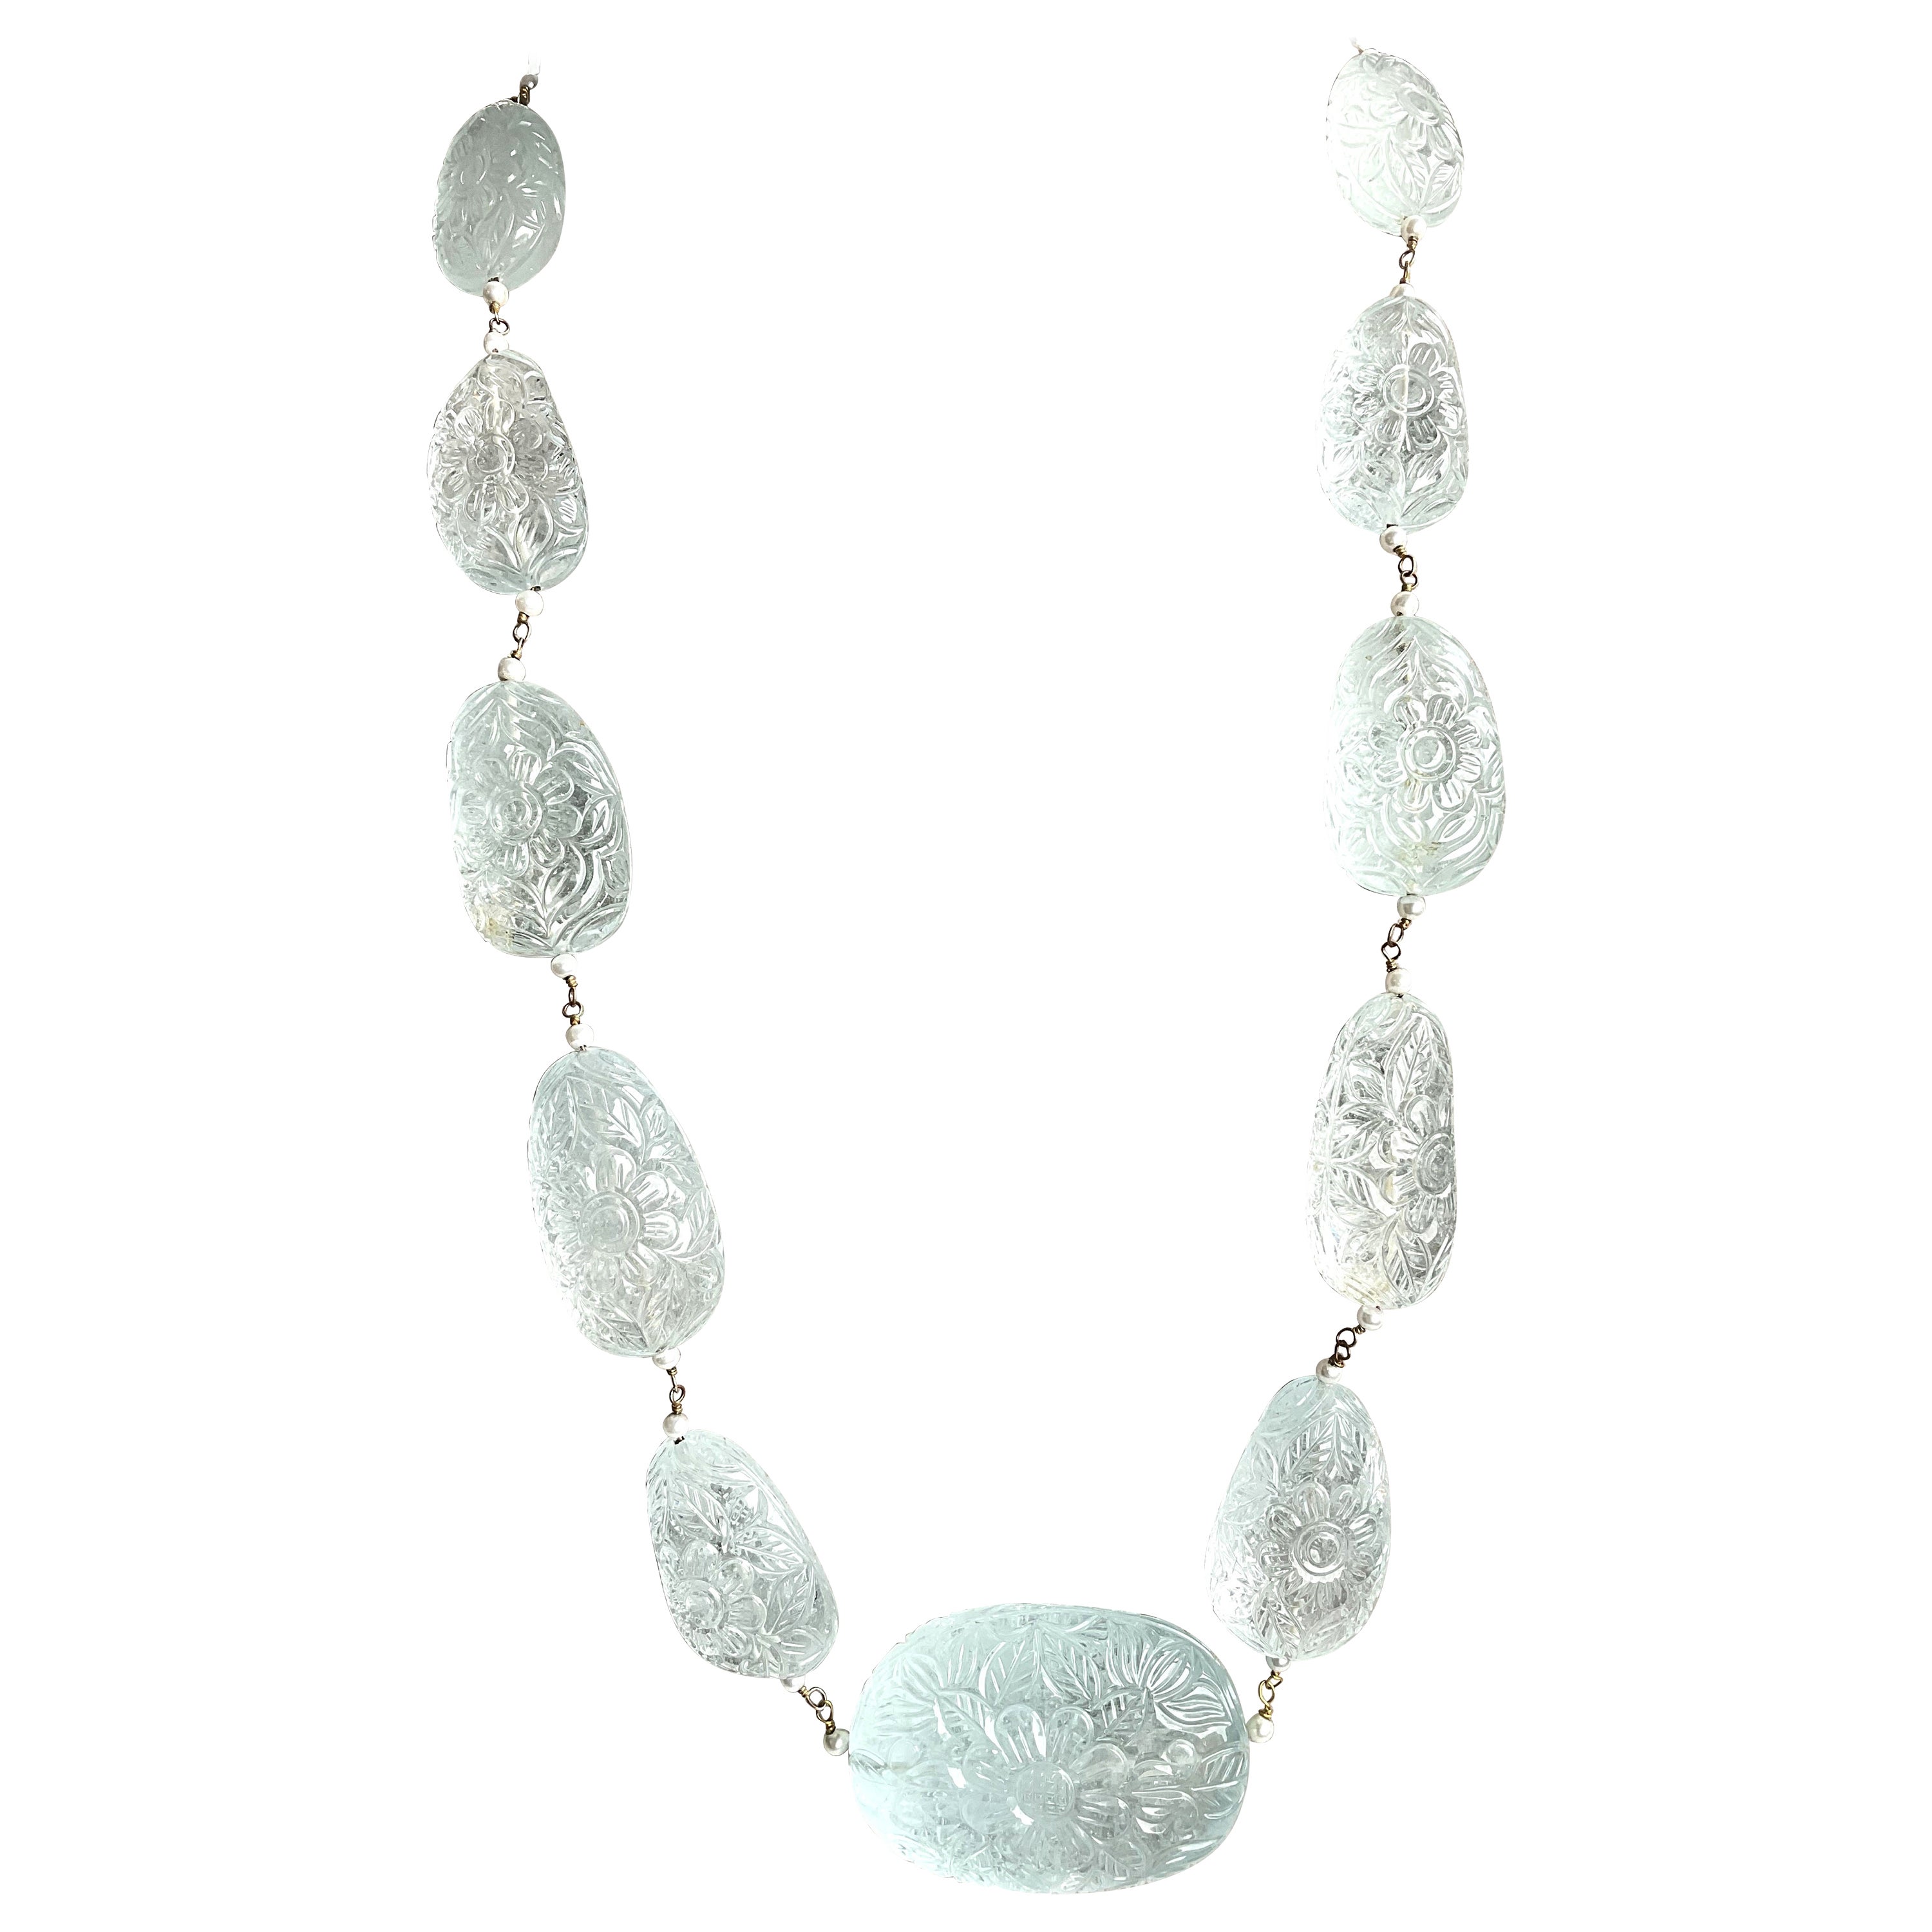 1828.70 Carats Aquamarine Carved Tumbled Necklace Top Quality Natural Gemstone For Sale